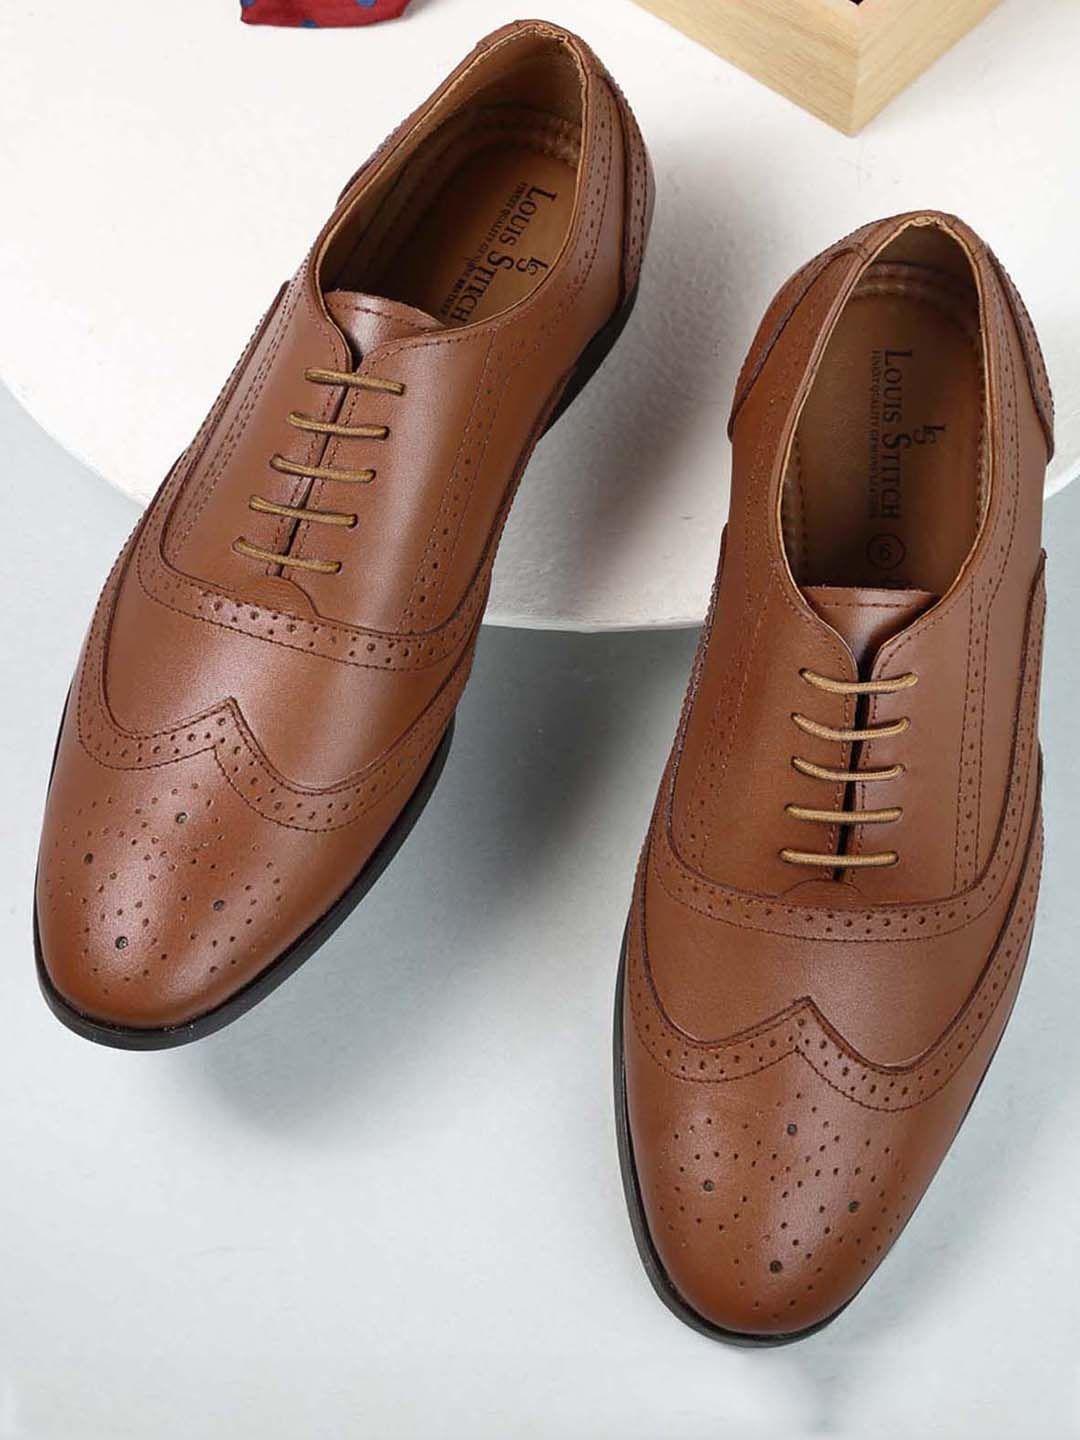 men-russet-tan-solid-leather-formal-lace-up-brogues-shoes